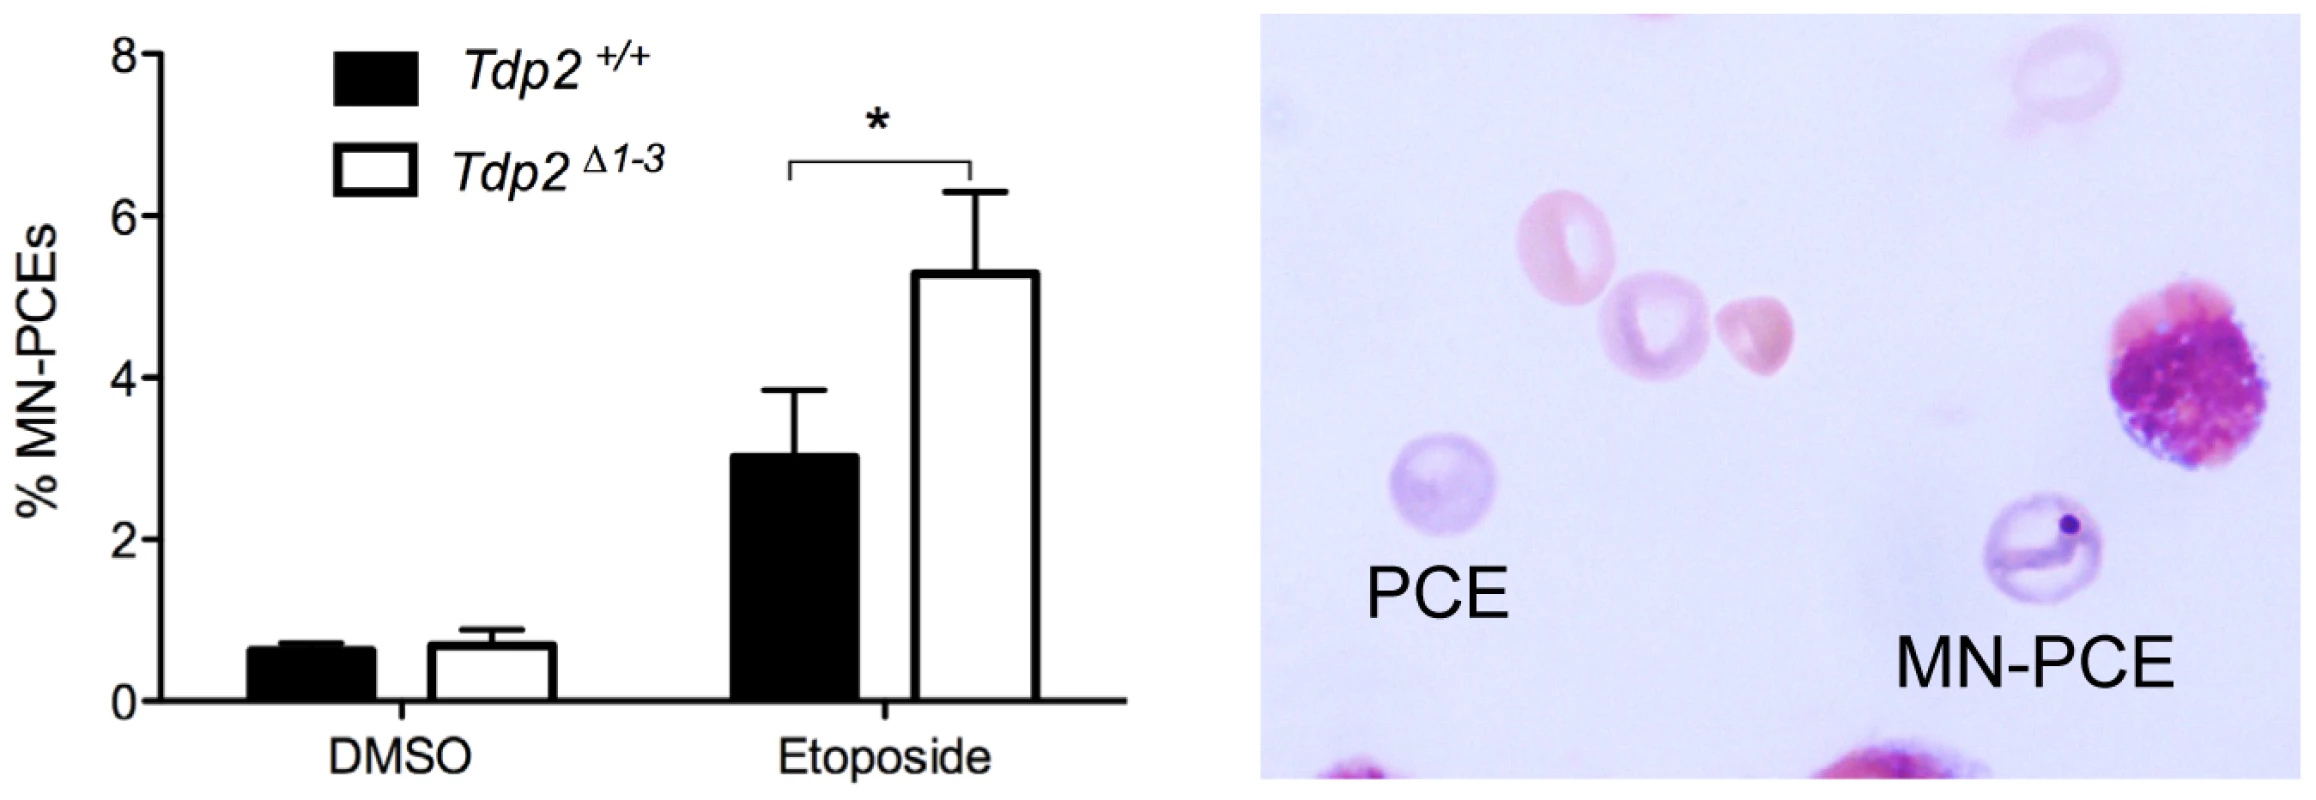 The absence of TDP2 increases etoposide-induced genome instability <i>in vivo</i>.